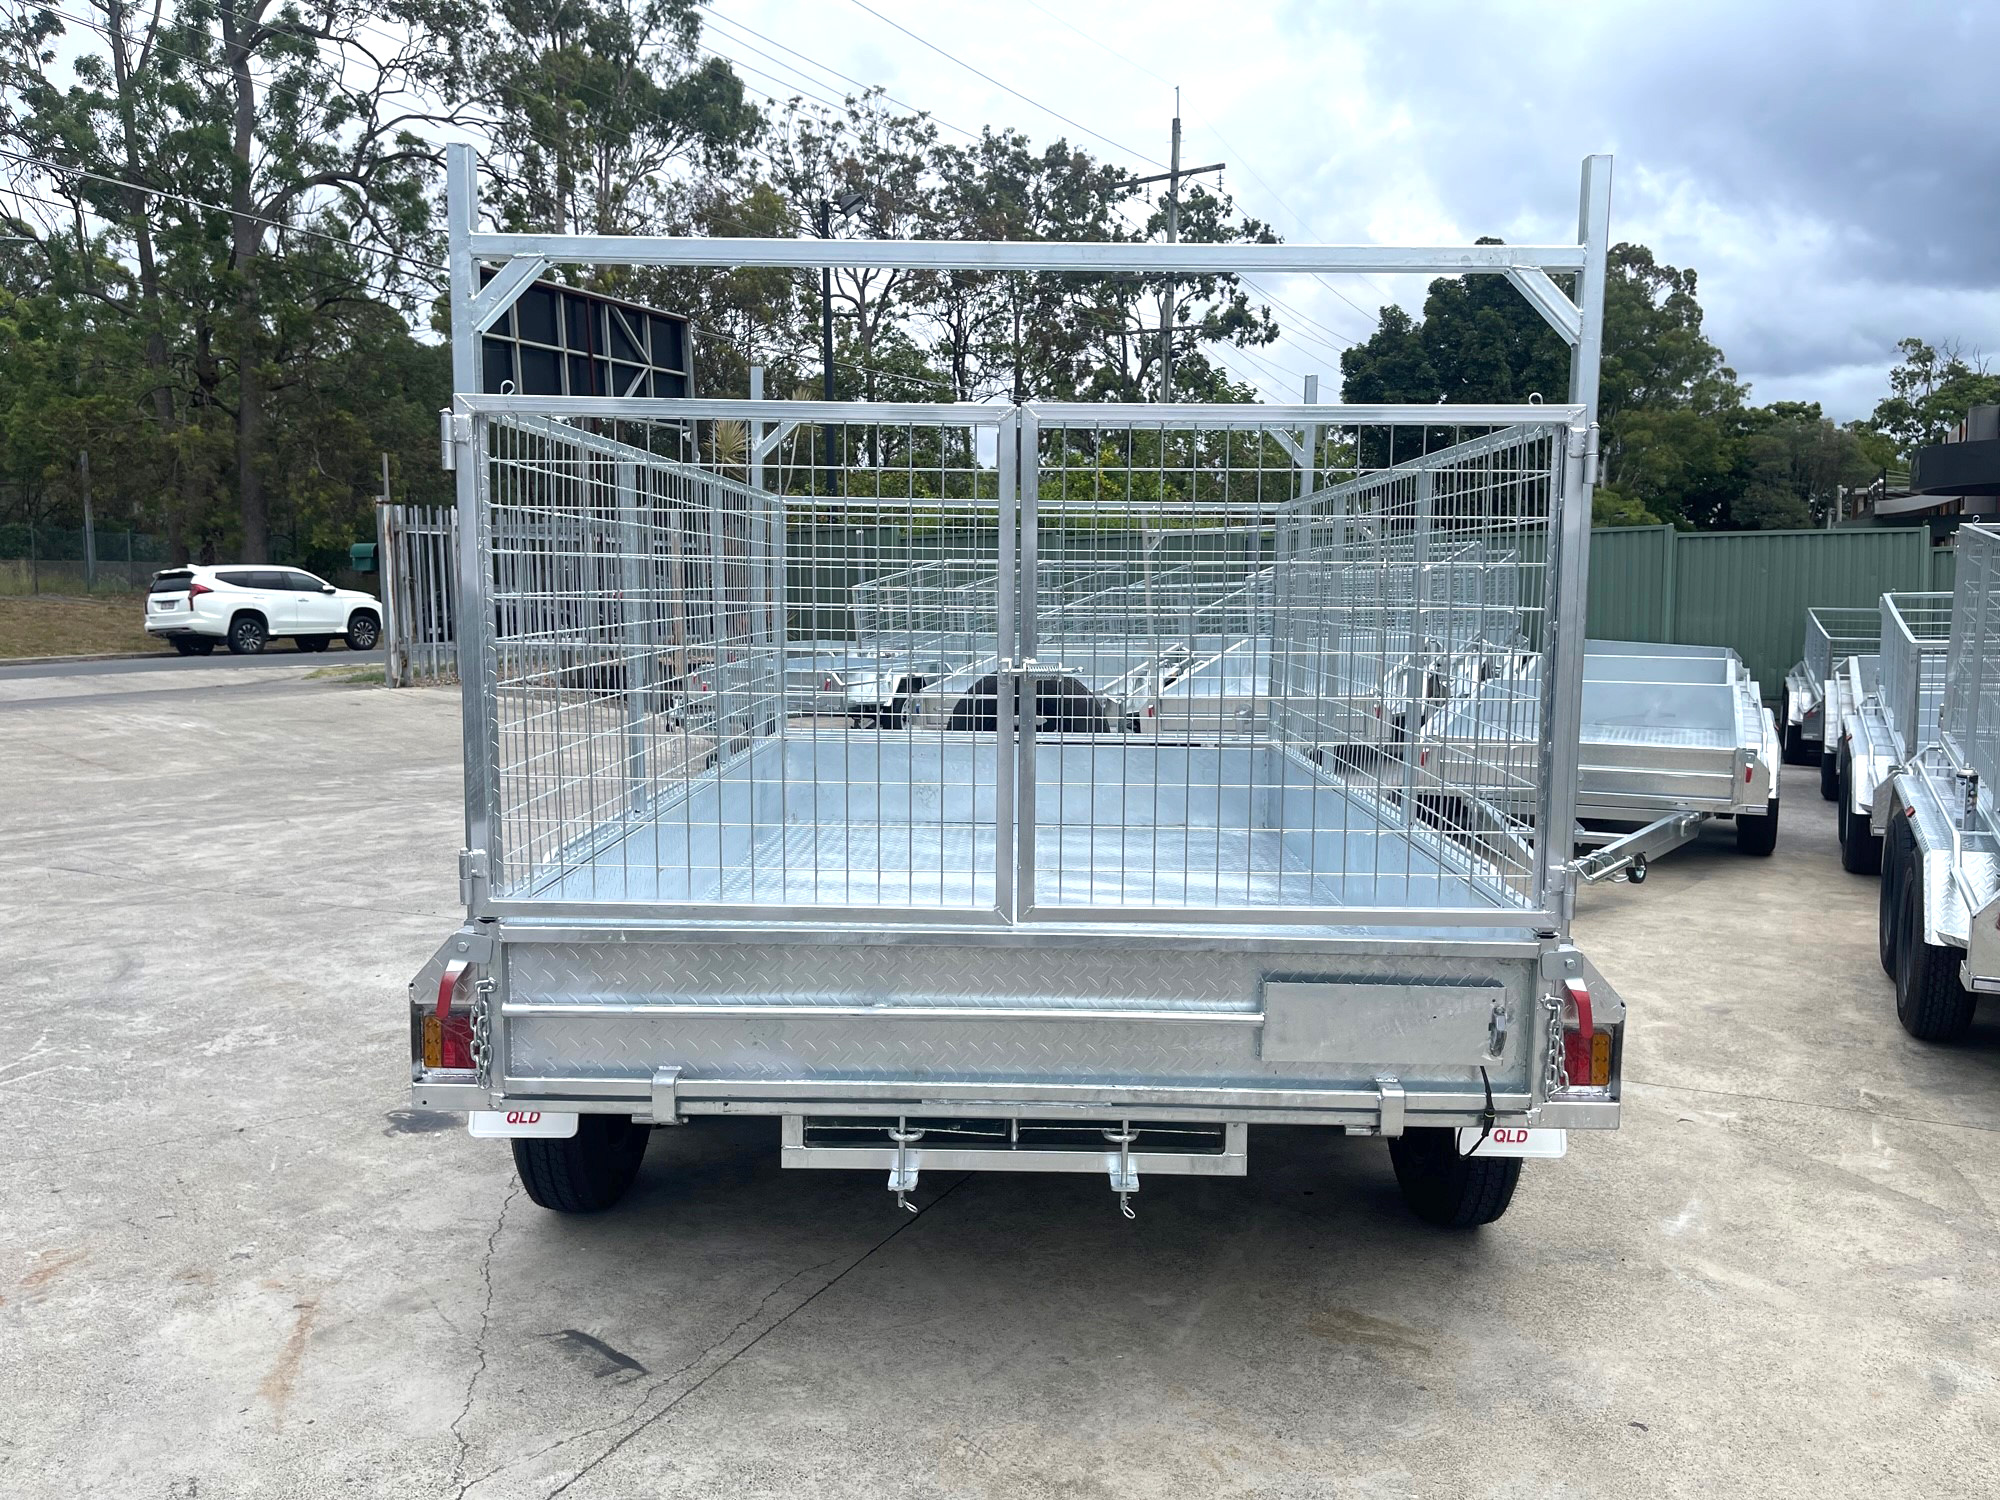 Galvanised Cage Trailers for Sale Brisbane with Rear Barn Doors